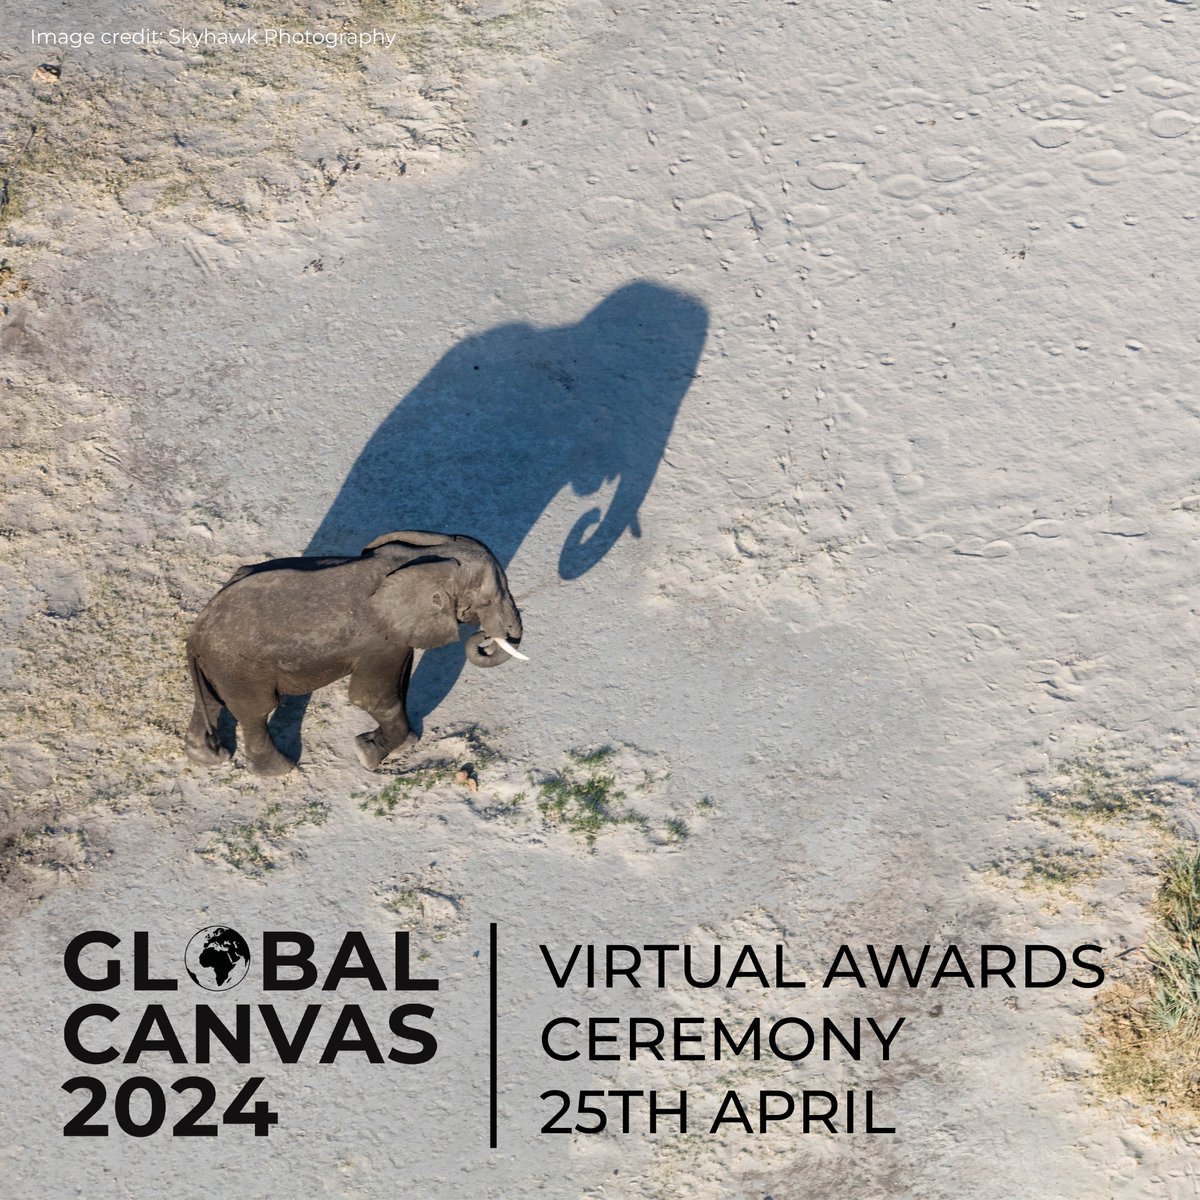 A record-breaking year for #GlobalCanvas24! 🎉 We're delighted to have engaged 3,535 children and received 1,828 entries from 71 countries! We can't wait to share all of the winners at our Virtual Award Ceremony, on April 25th. Stay tuned for more details on how to attend.